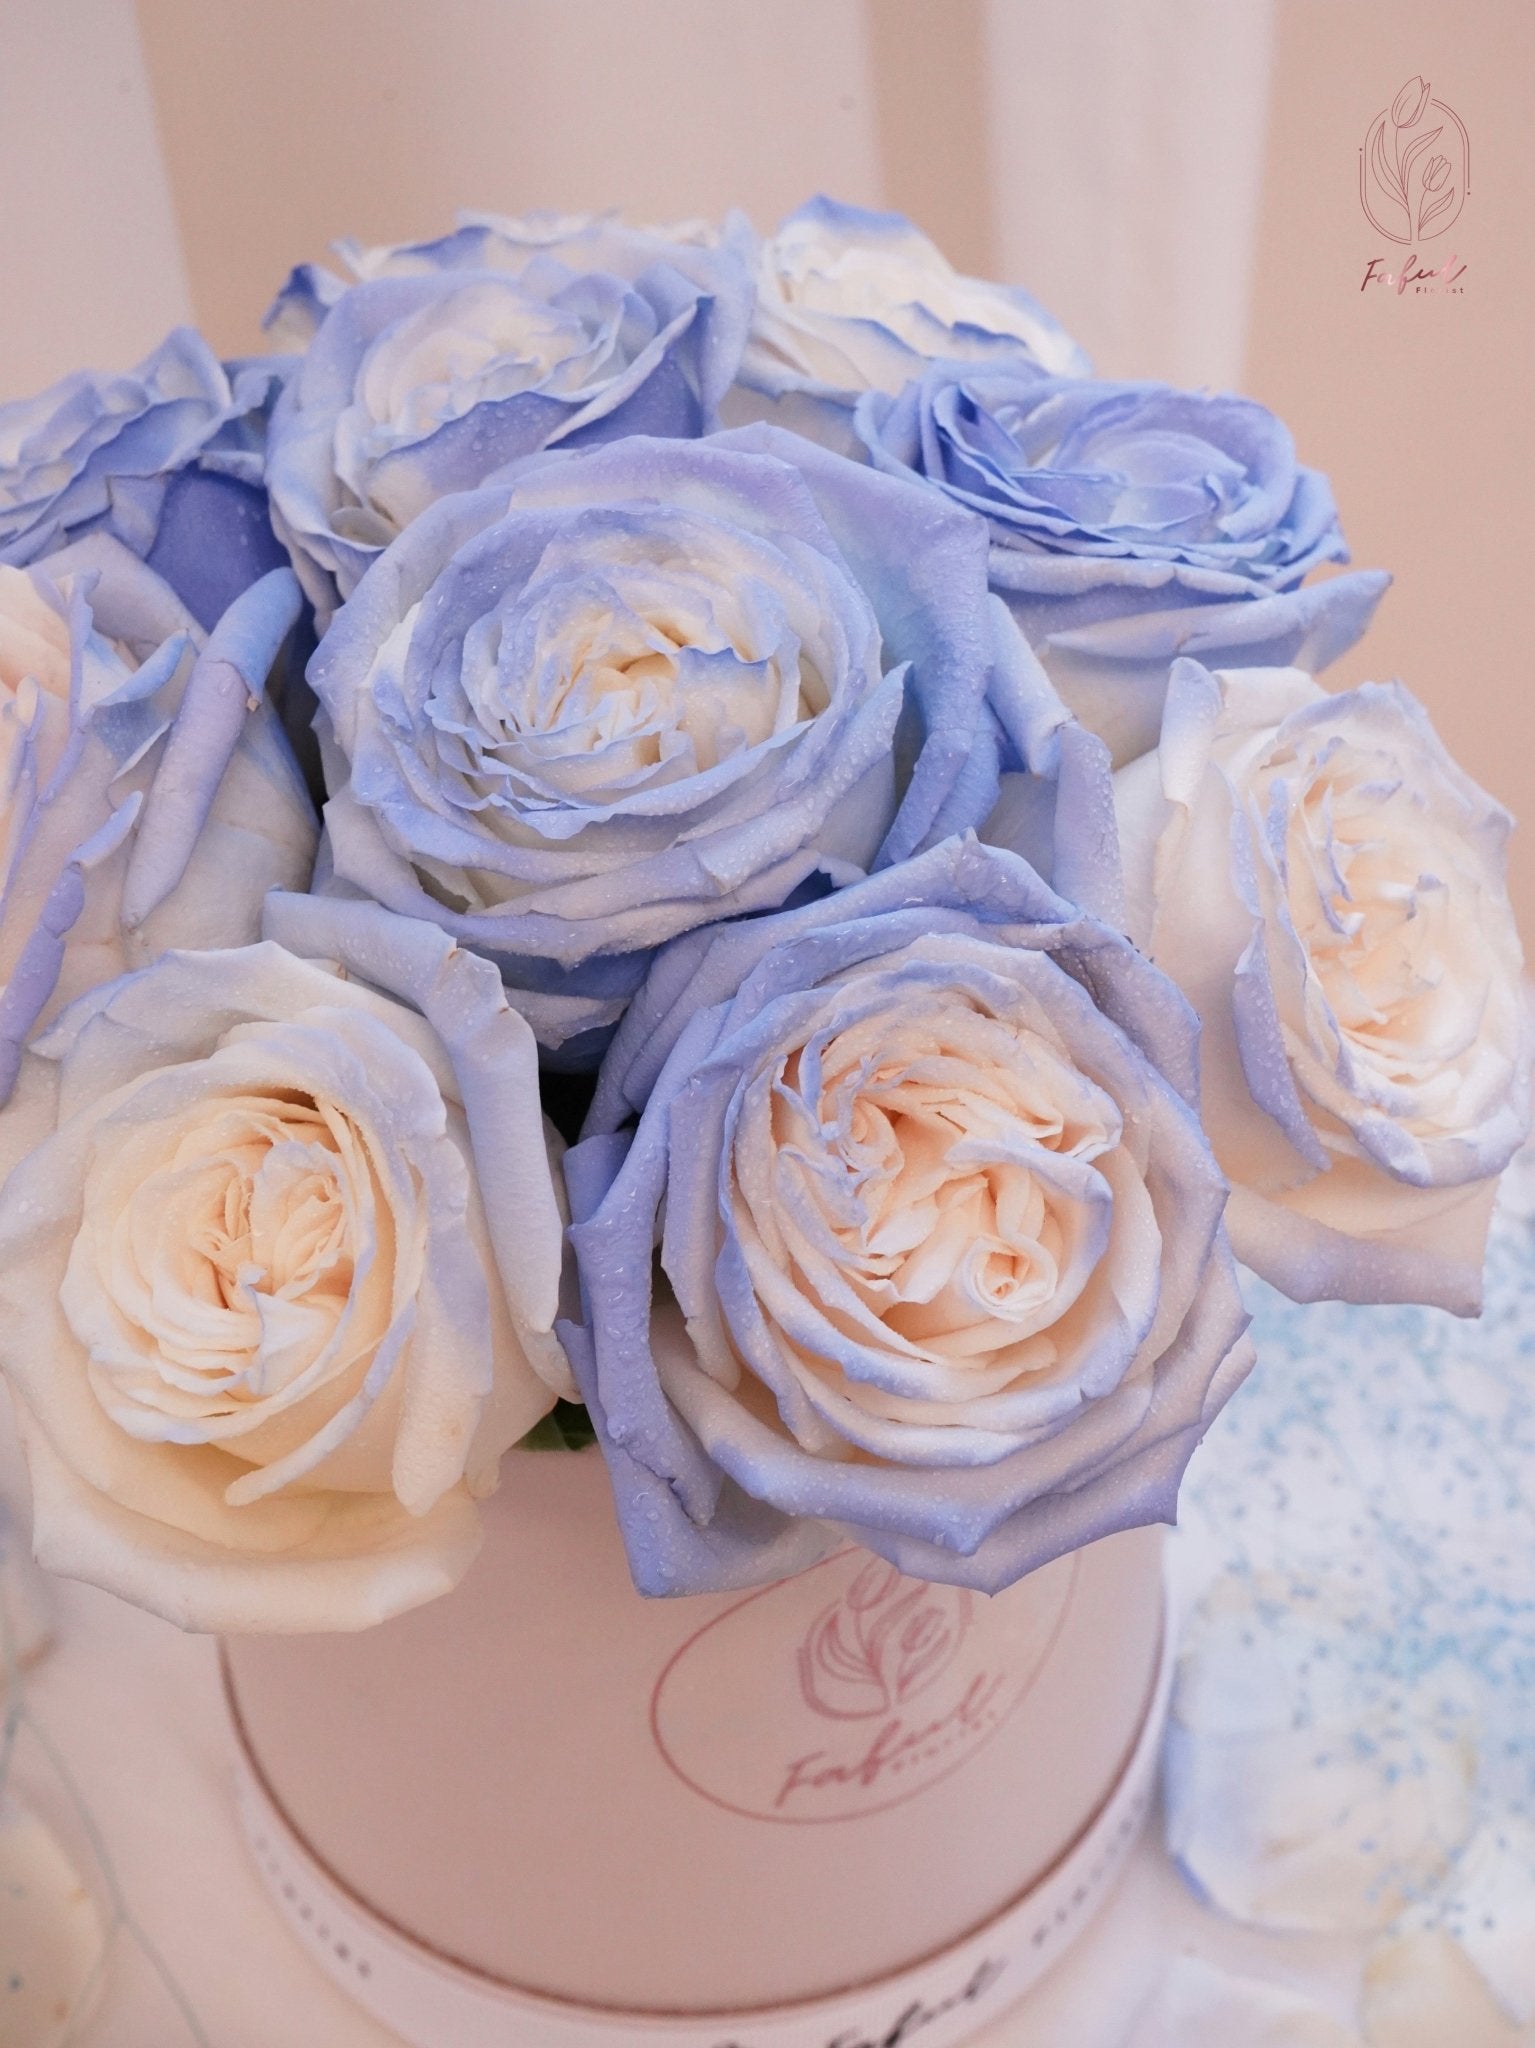  "Frozen Blue Rose Flowers" - A mesmerizing flower box featuring stunning blue roses, perfect flowers for flower delivery in Hong Kong.4